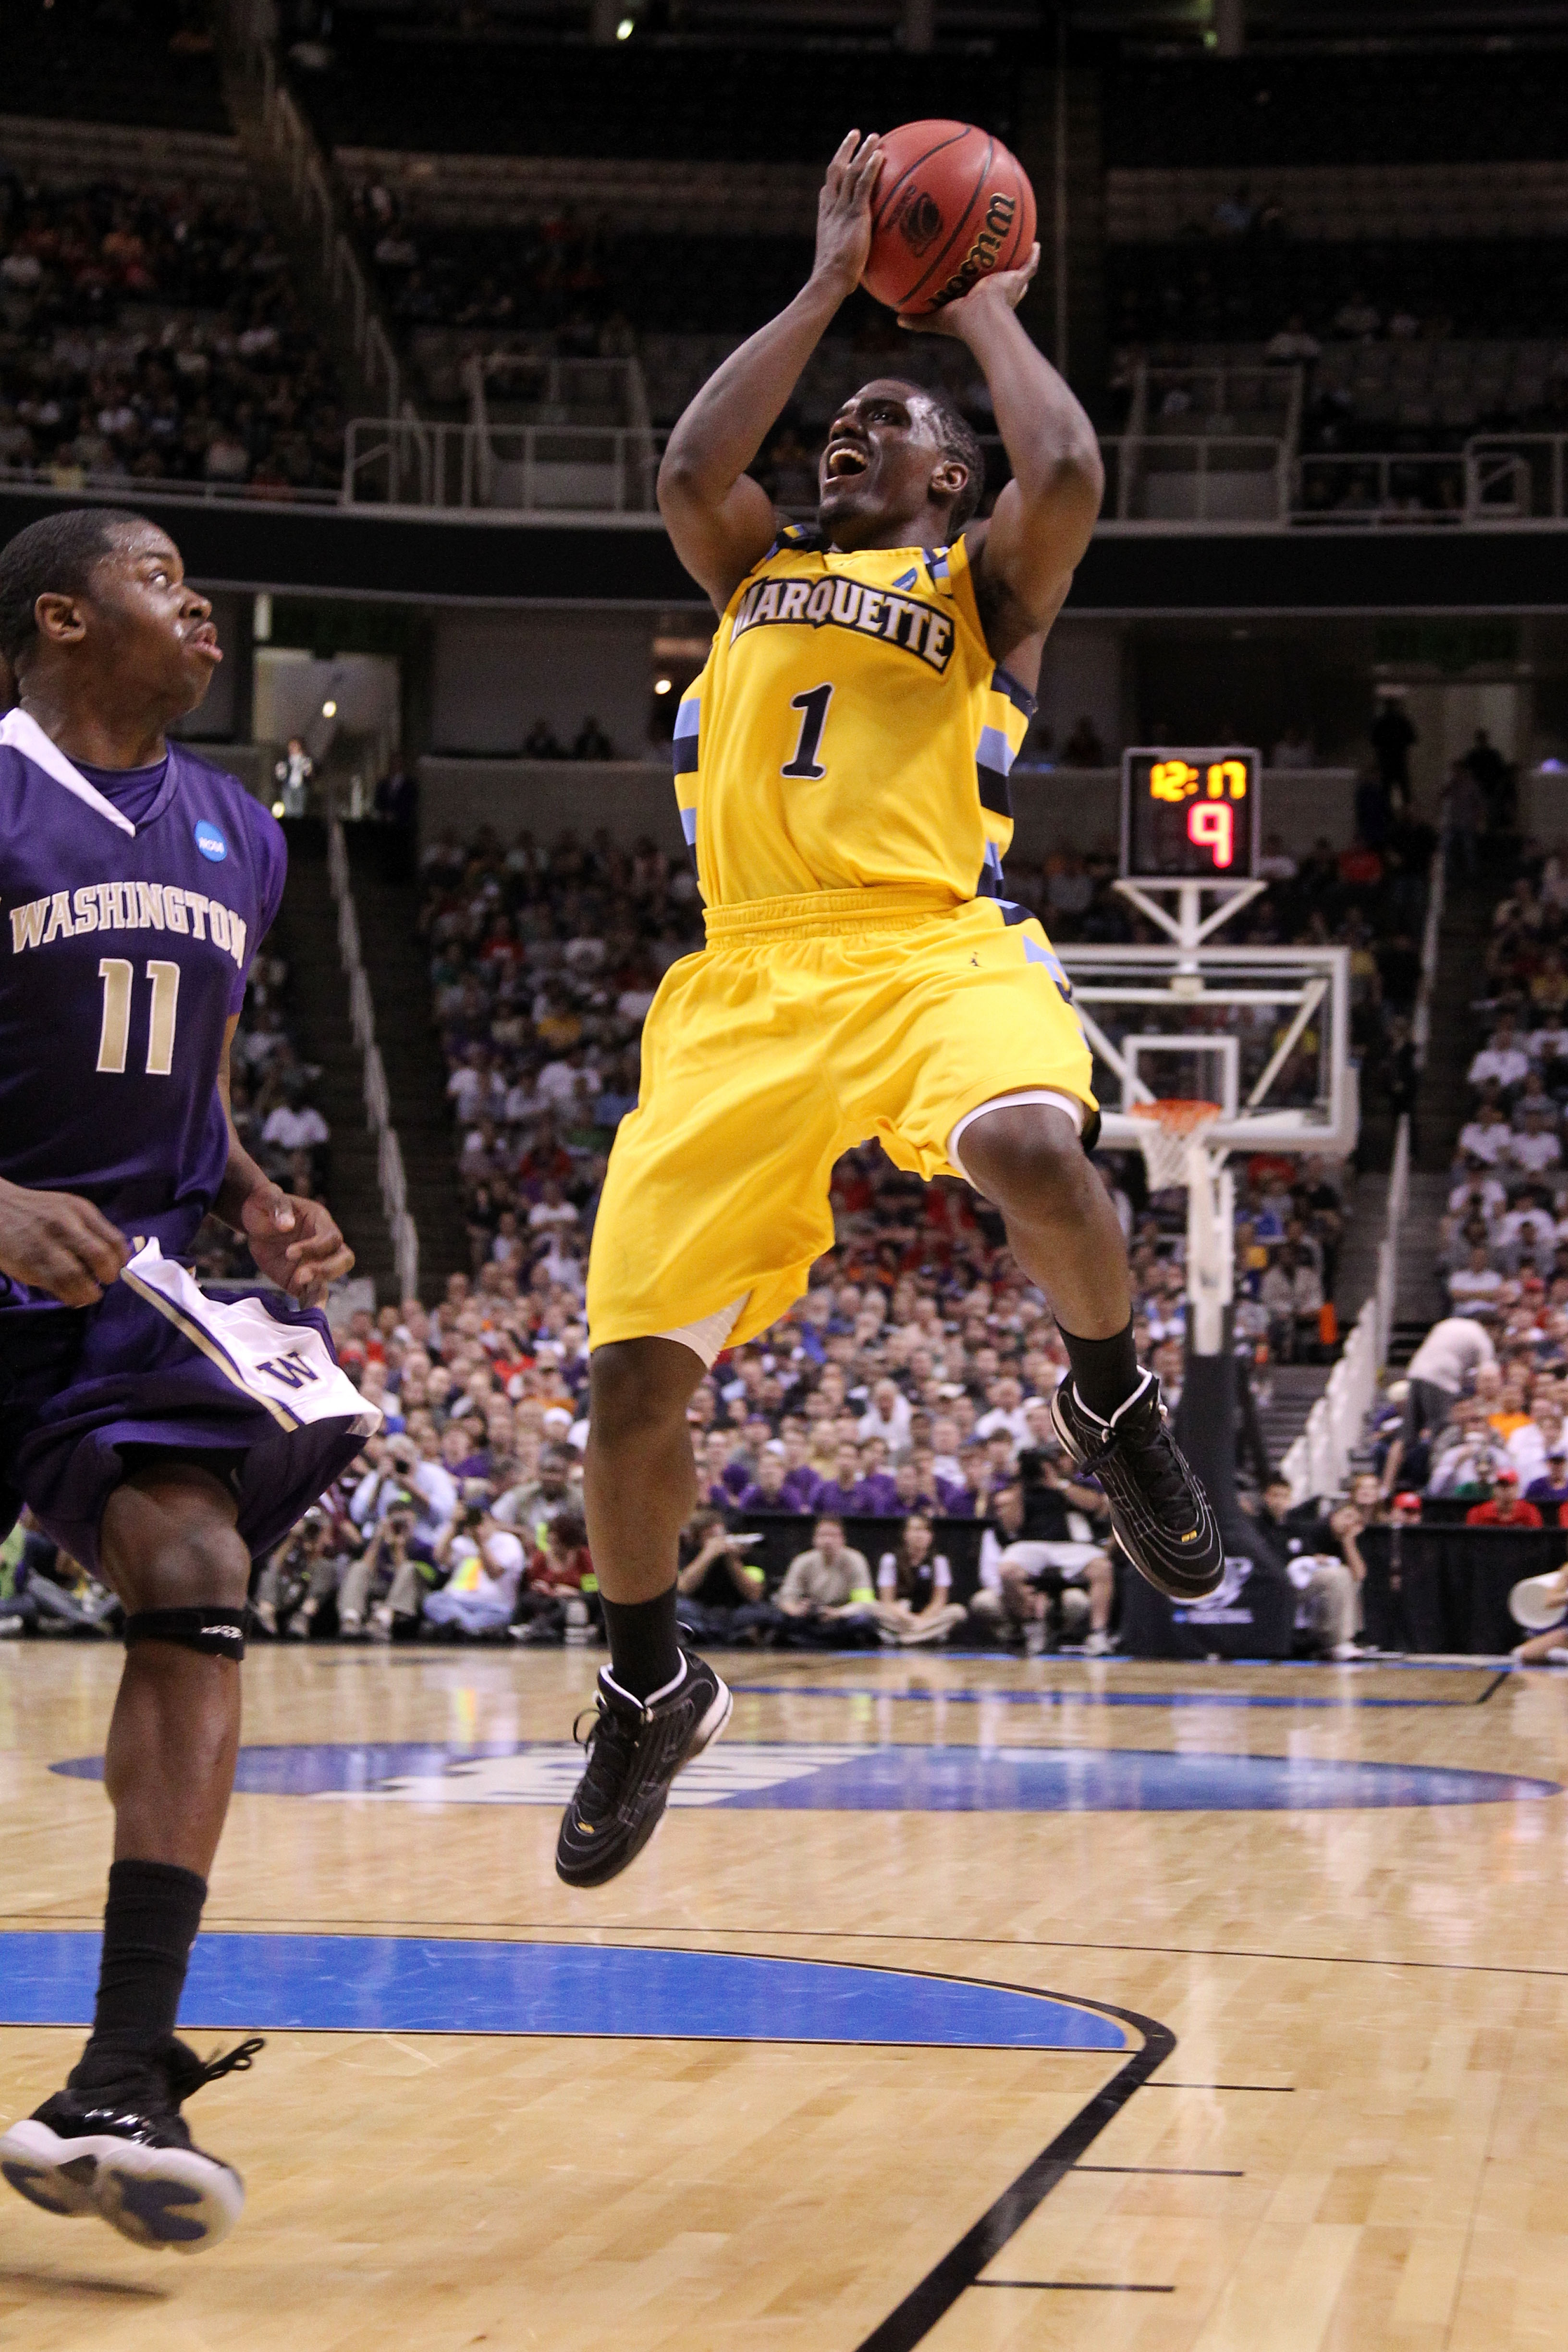 SAN JOSE, CA - MARCH 18:  Guard Darius Johnson-Odom #1 of the Marquette Golden Eagles takes a shot against the Washington Huskies during the first round of the 2010 NCAA men's basketball tournament at HP Pavilion on March 18, 2010 in San Jose, California.